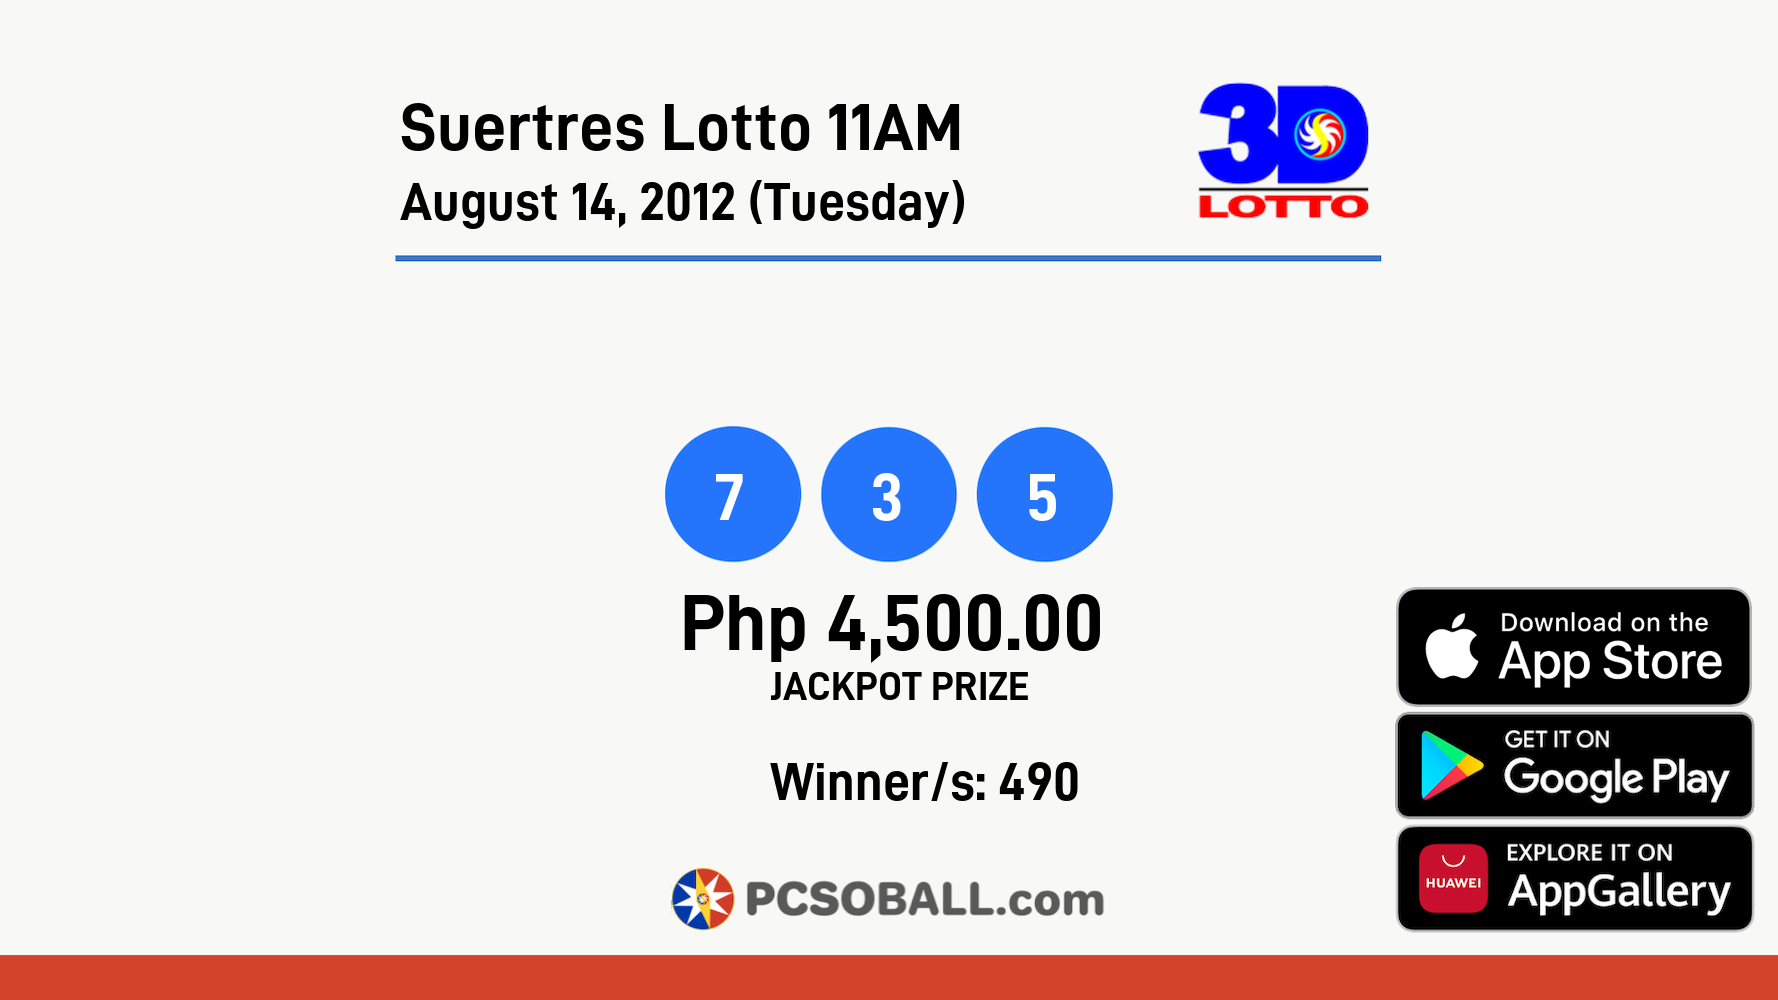 Suertres Lotto 11AM August 14, 2012 (Tuesday) Result